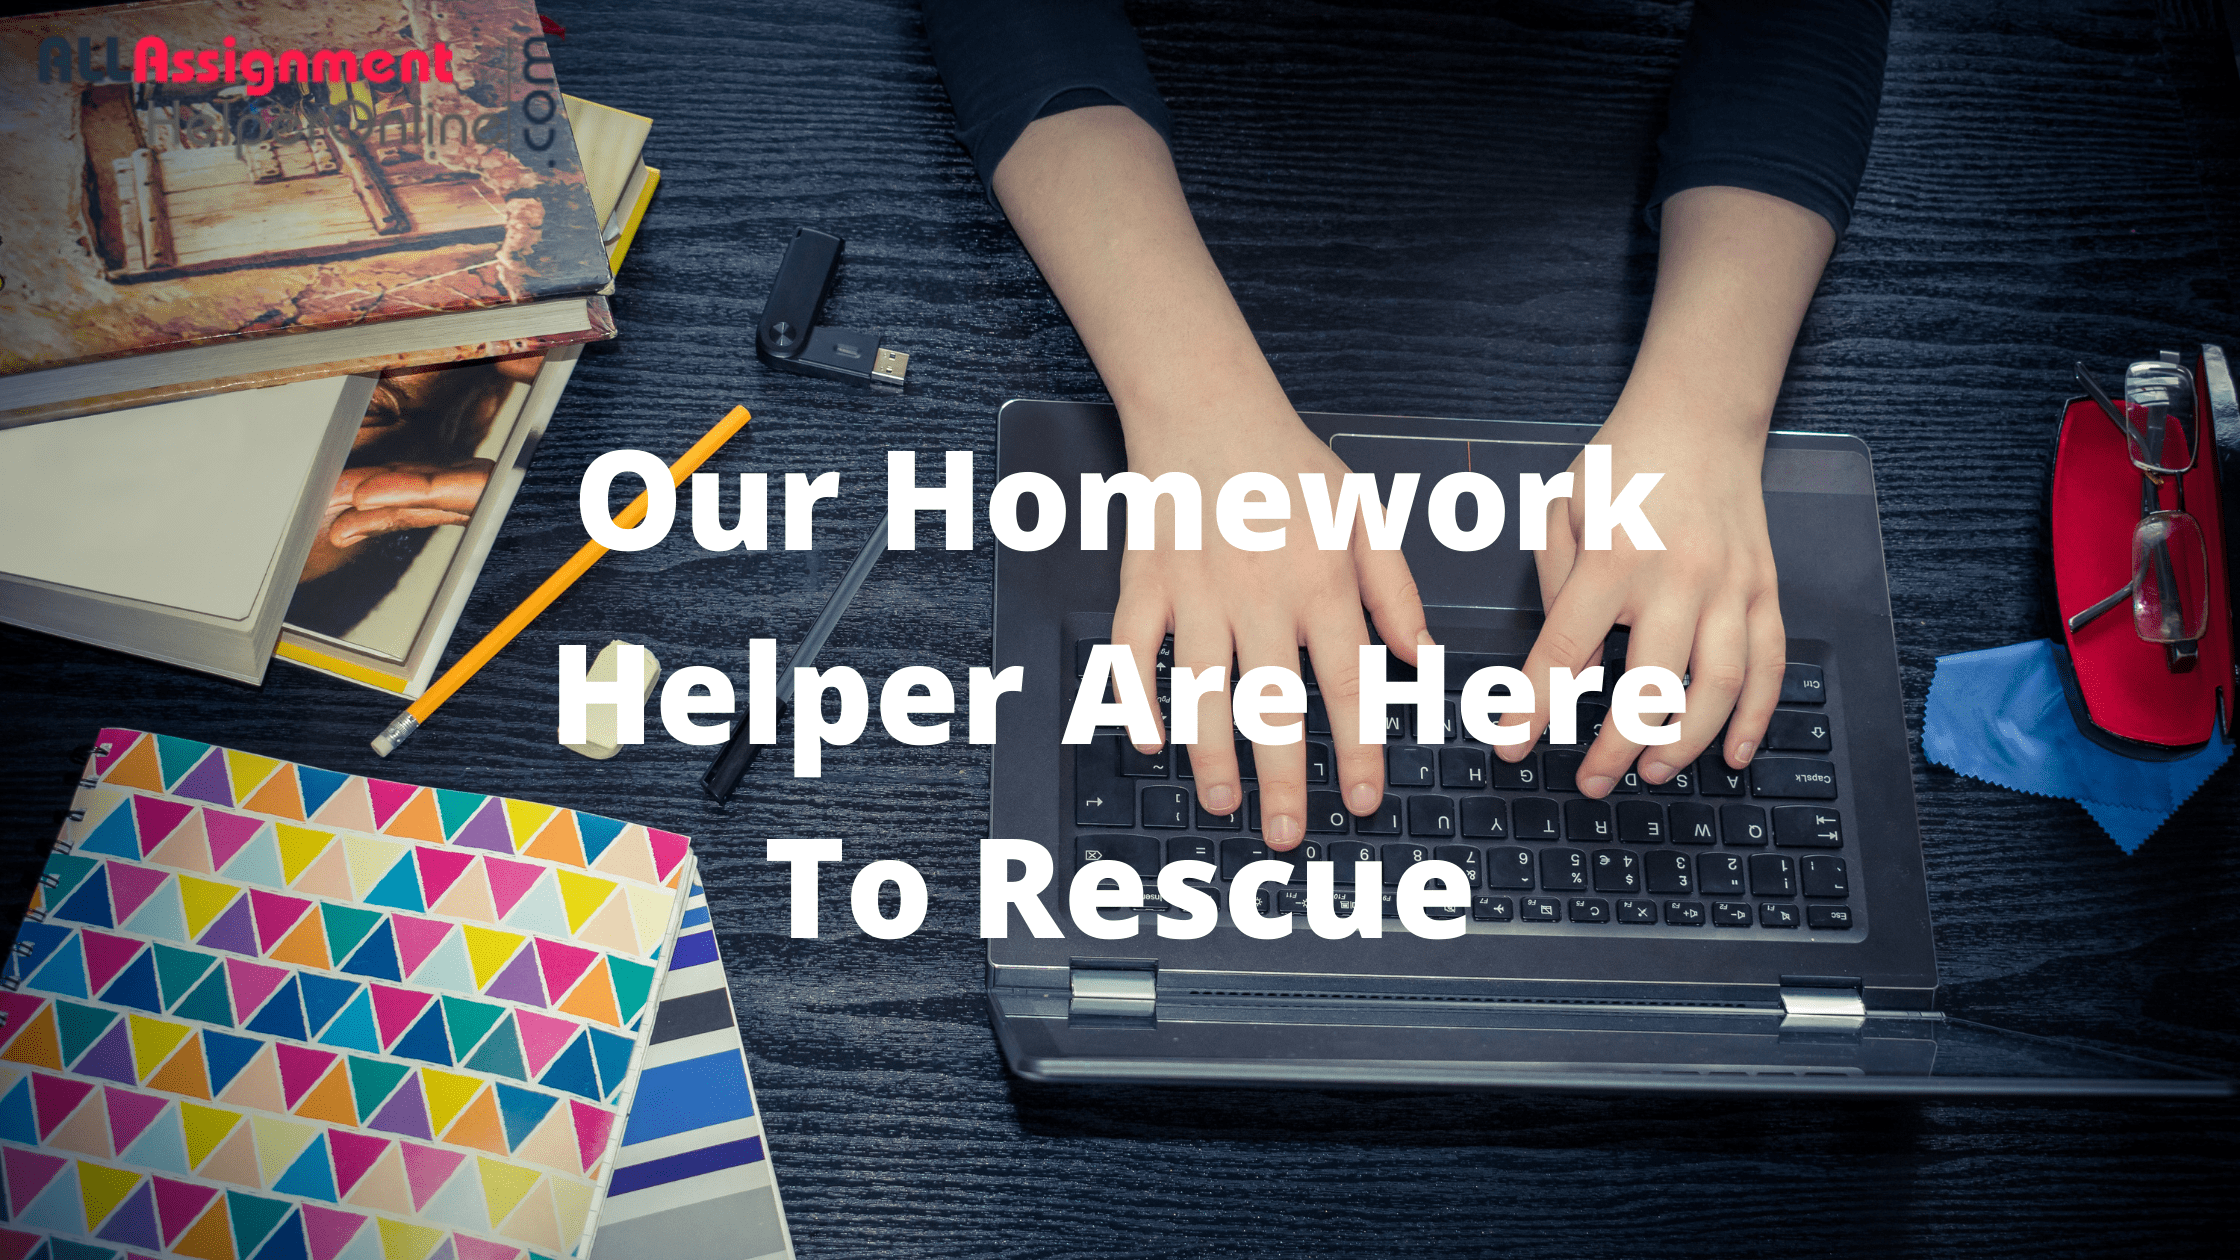 Our Homework Helper Are Here To Rescue